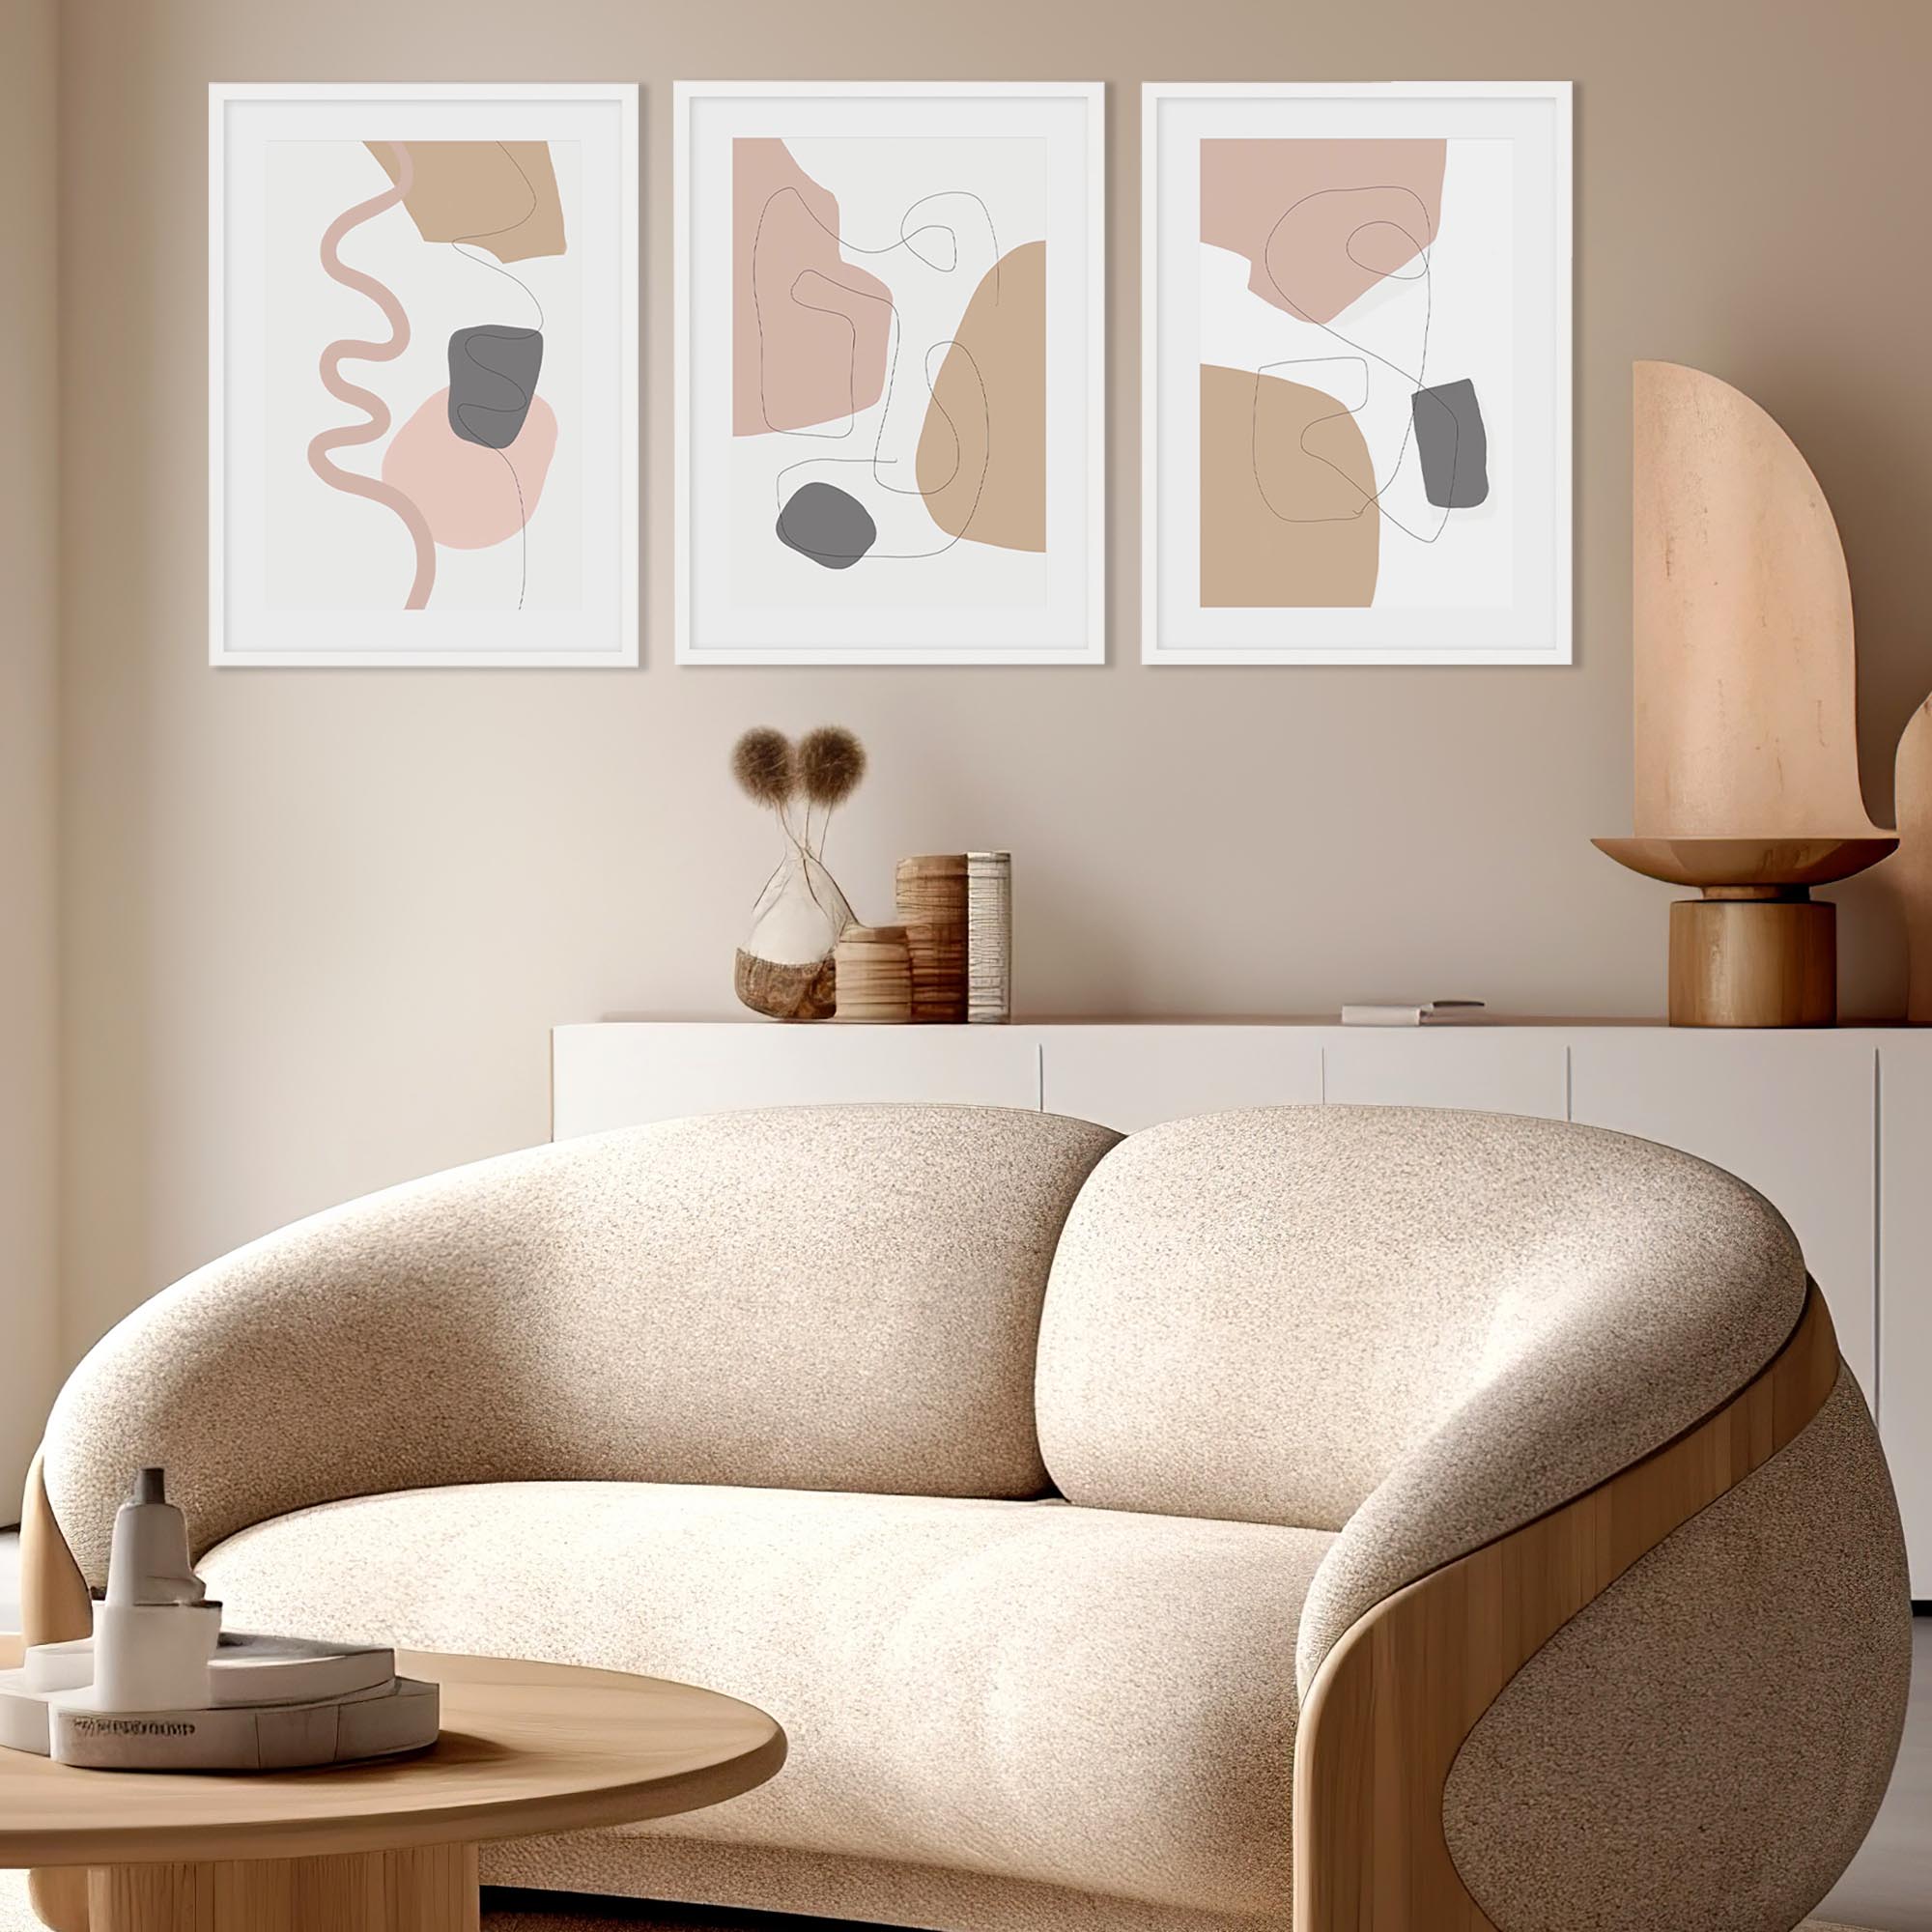 Blushed Organic Shapes - Set Of 3 Prints-Abstract House